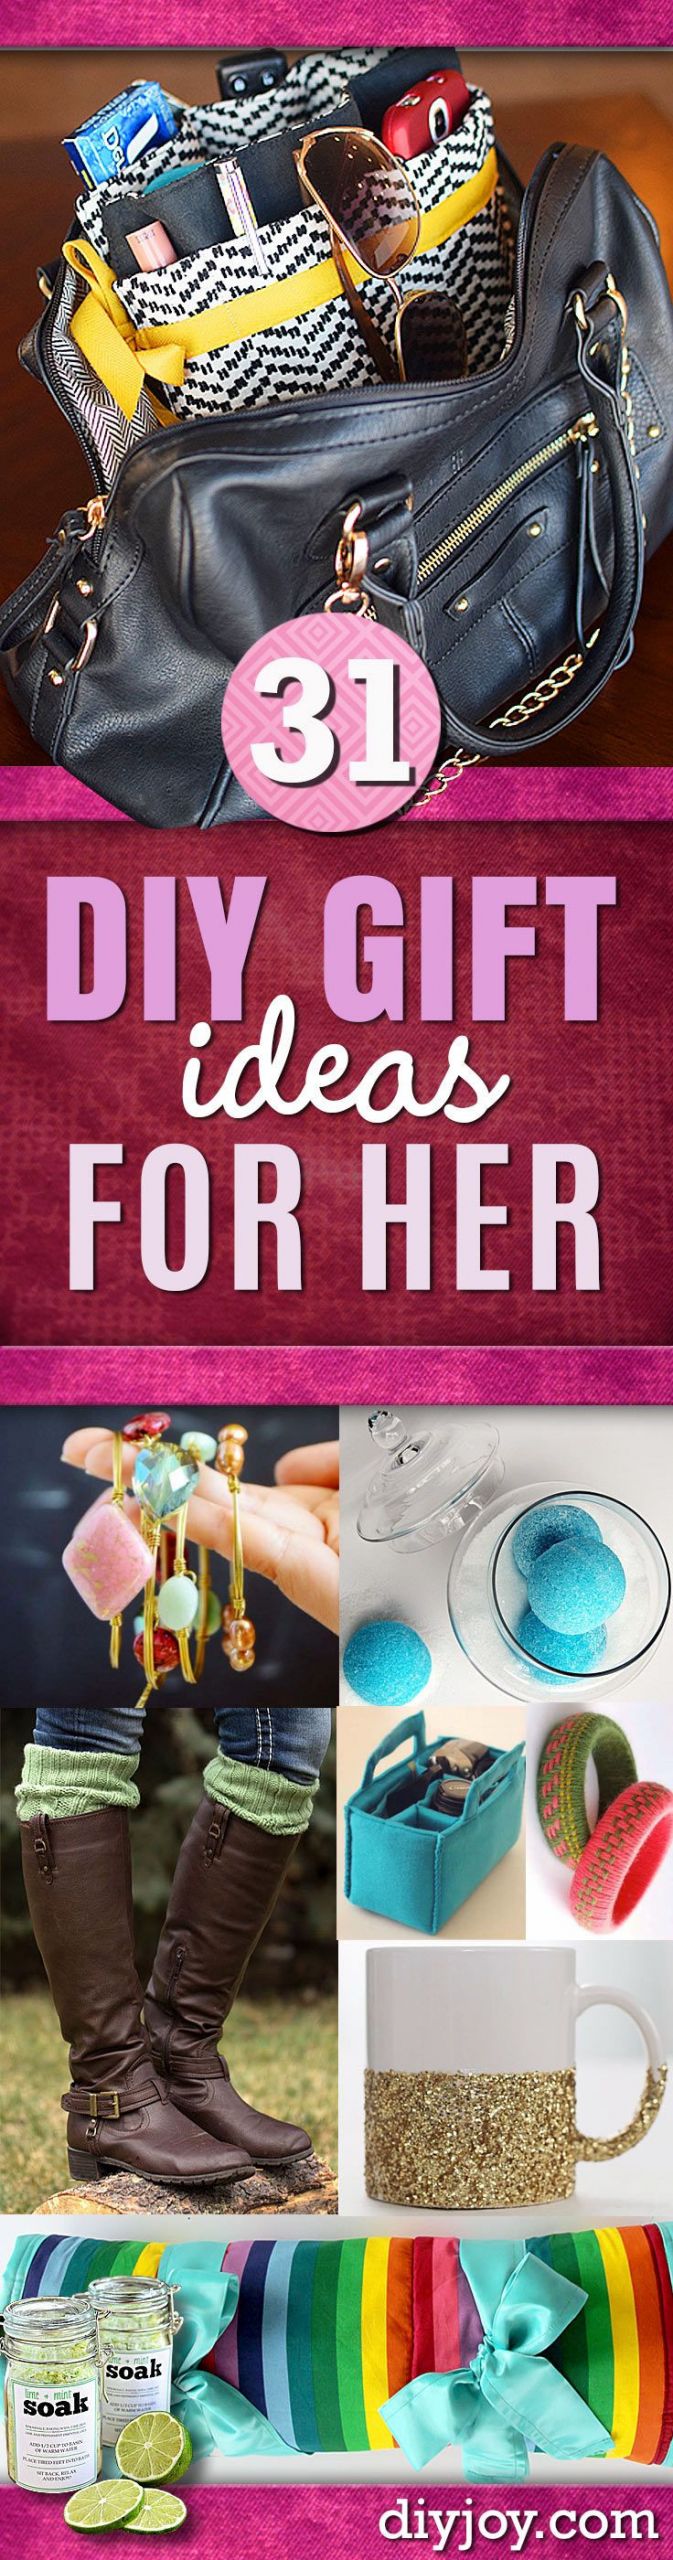 Diy Gift Ideas For Girlfriend
 DIY Gift Ideas for Her